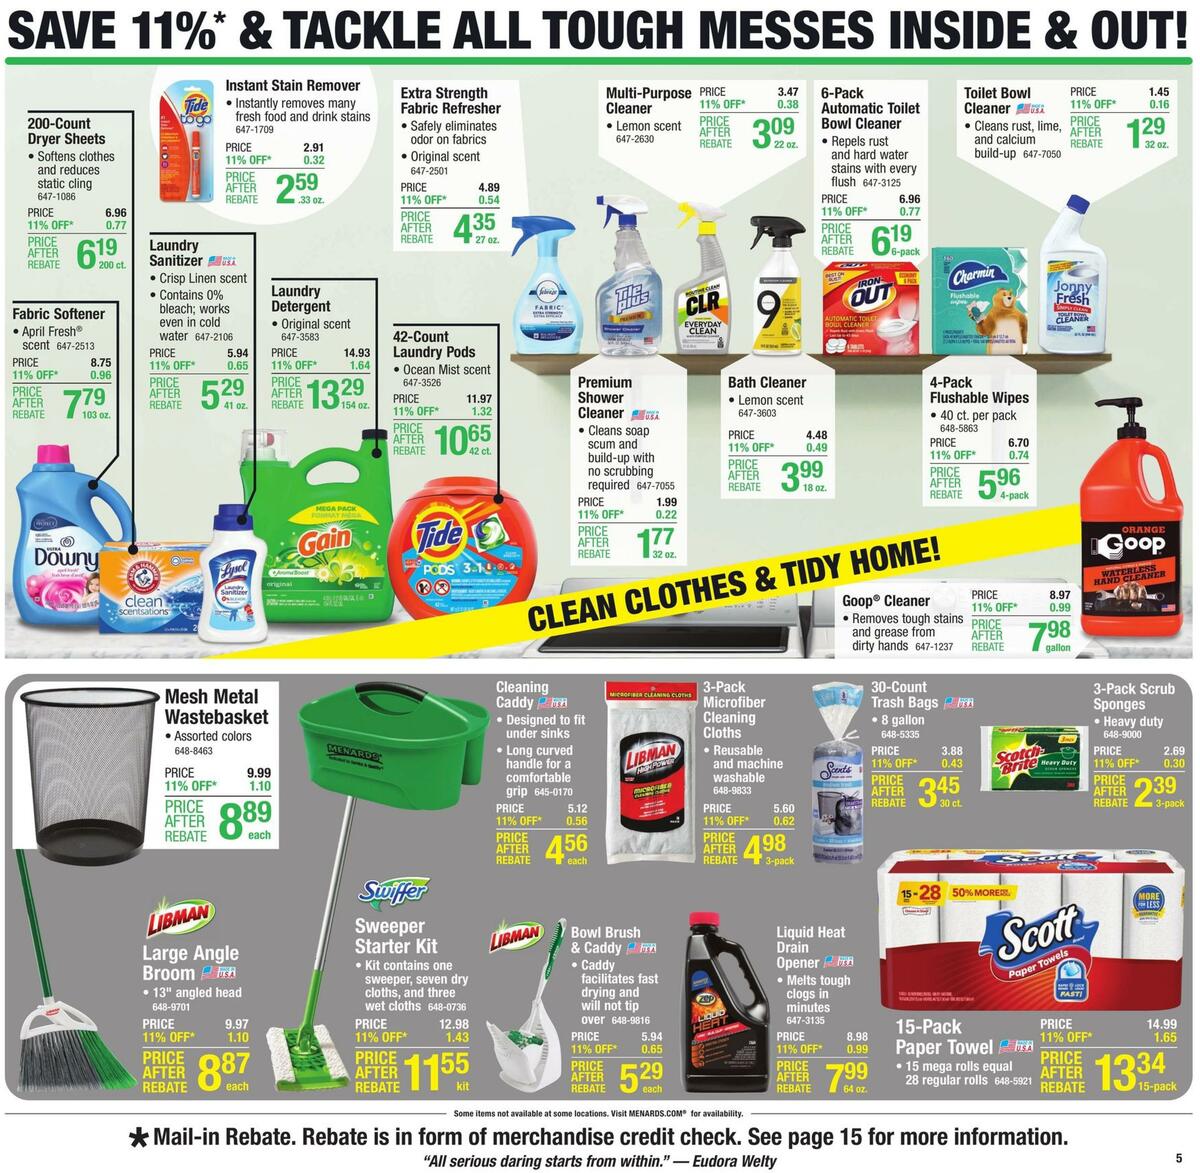 Menards Weekly Ad from July 28